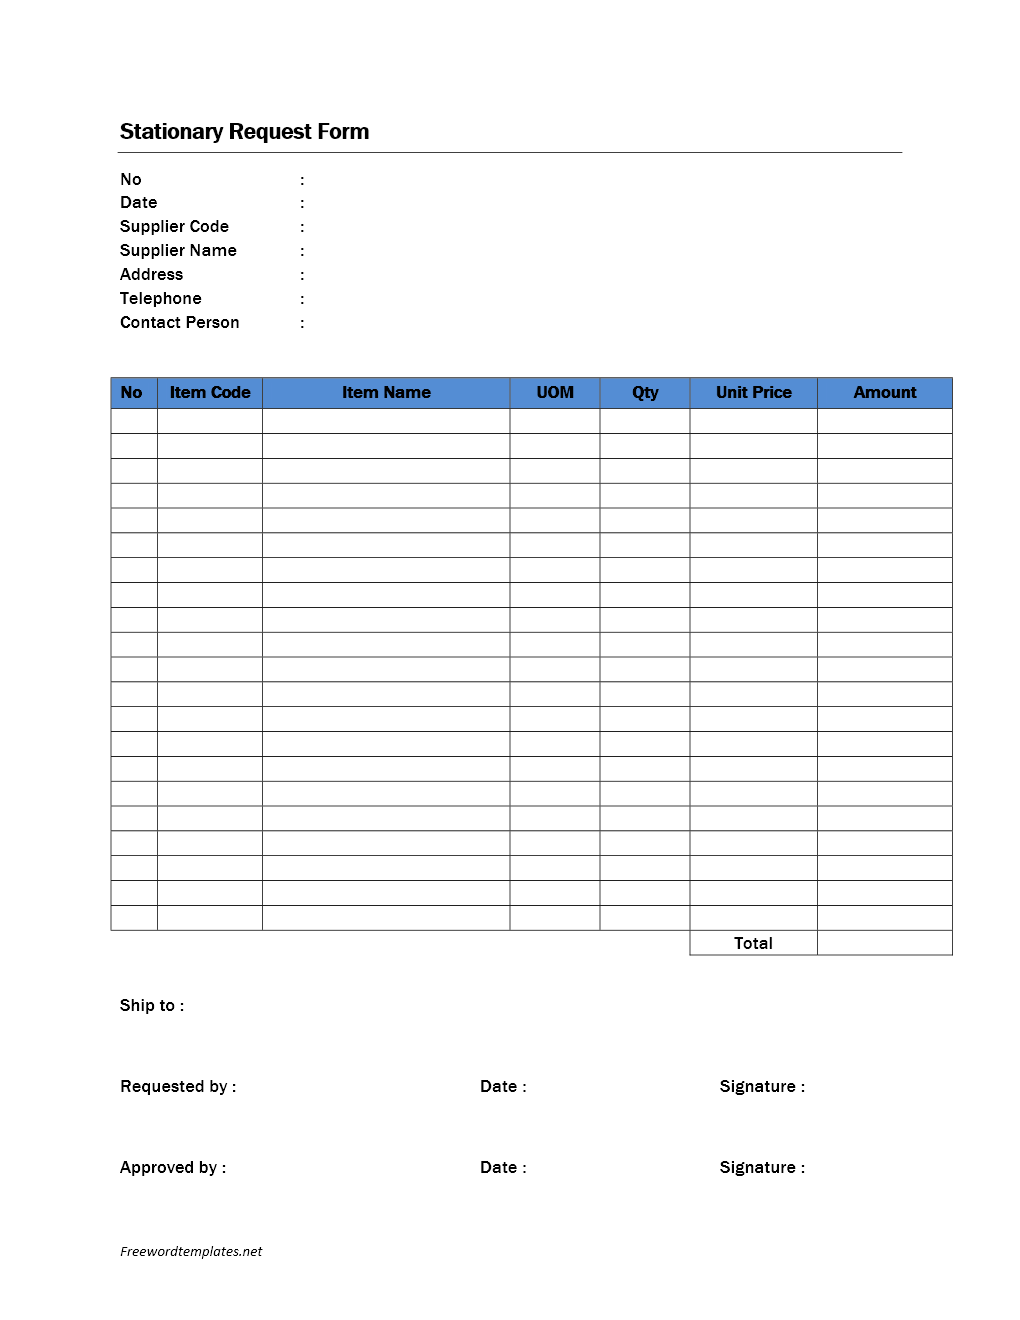 stationery-request-form